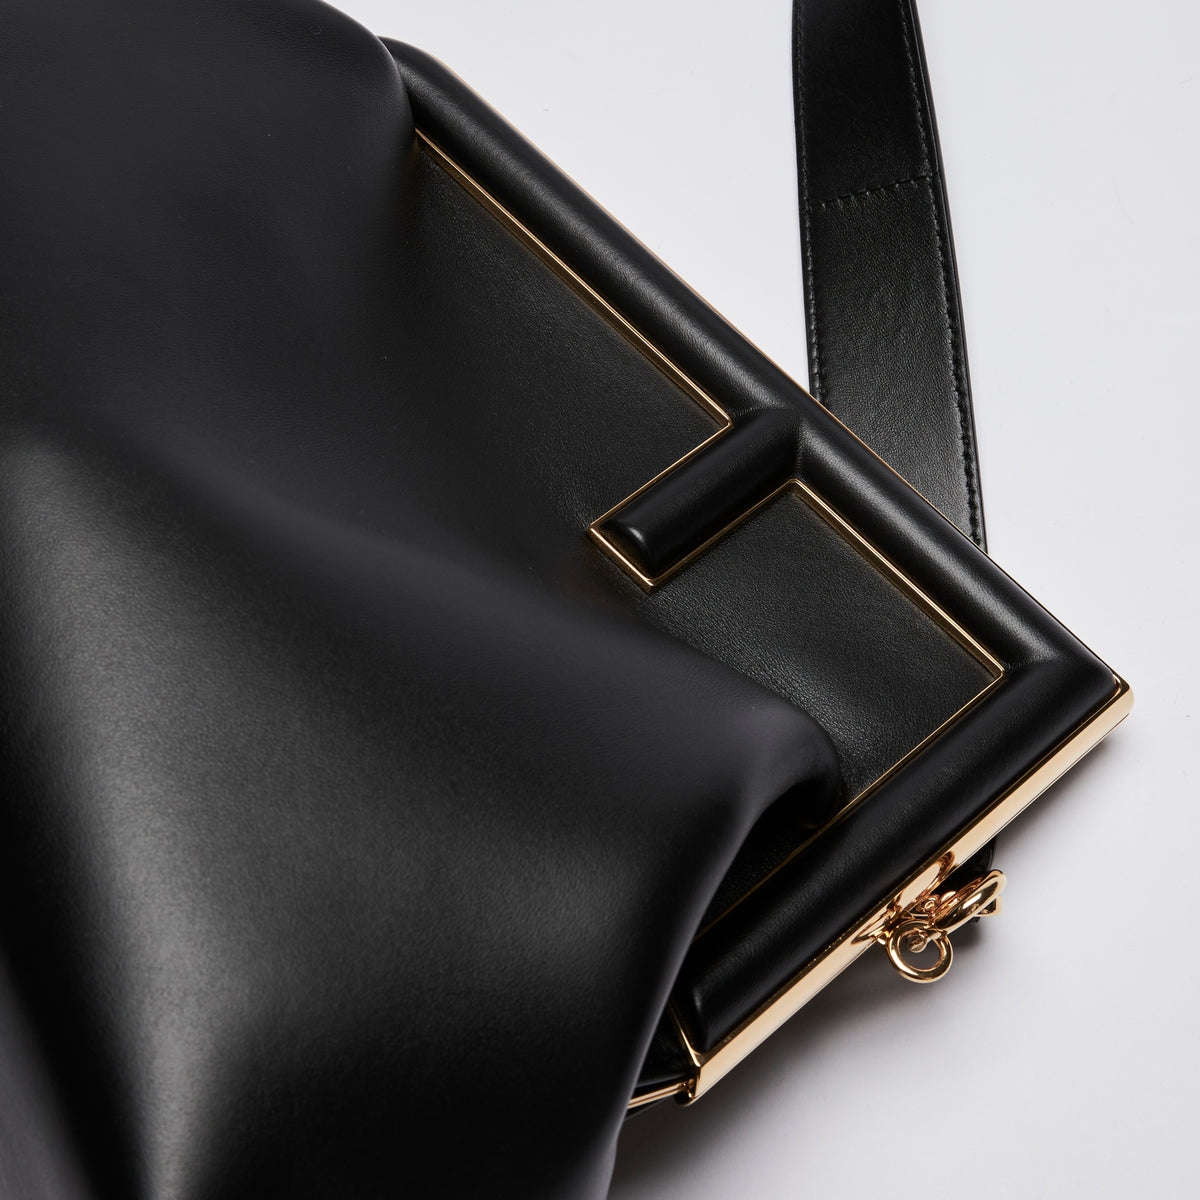 Excellent Pre-Loved Black Smooth Leather Asymmetrical Clutch Bag.(close up)